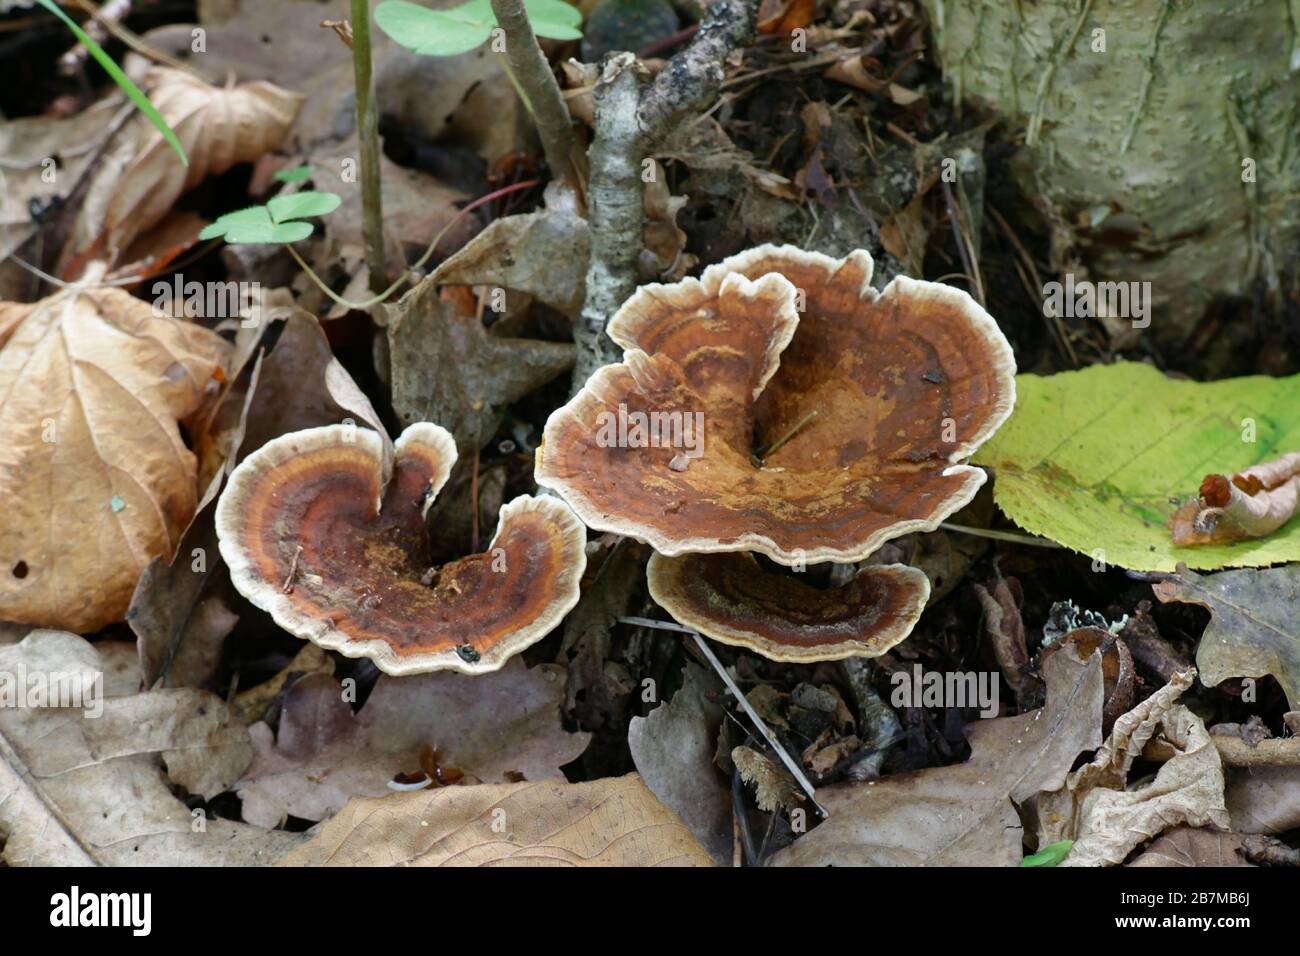 Pelloporus tomentosus, known as Velvet Rosette, a polypory fungus from Finland Stock Photo